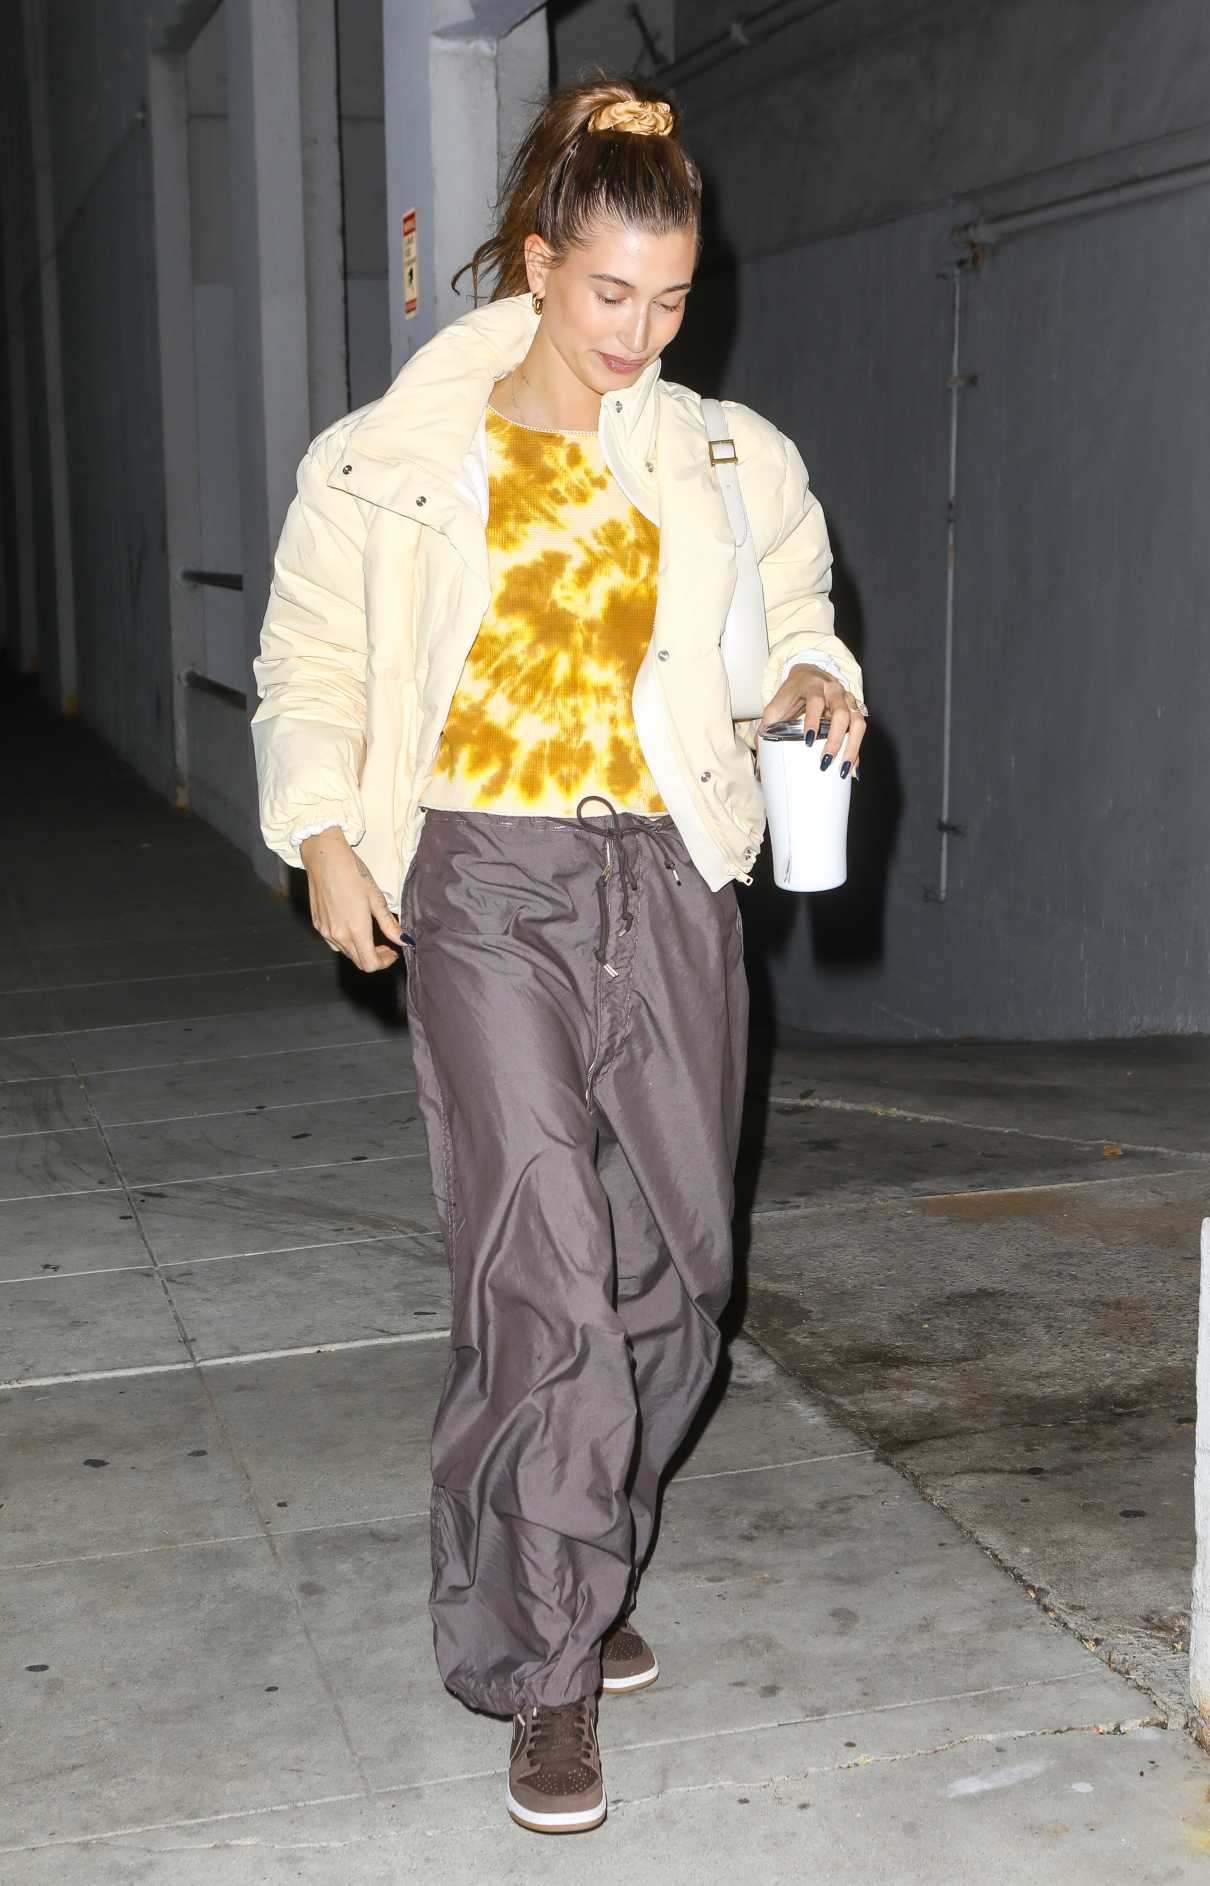 Hailey Bieber in a Yellow Jacket